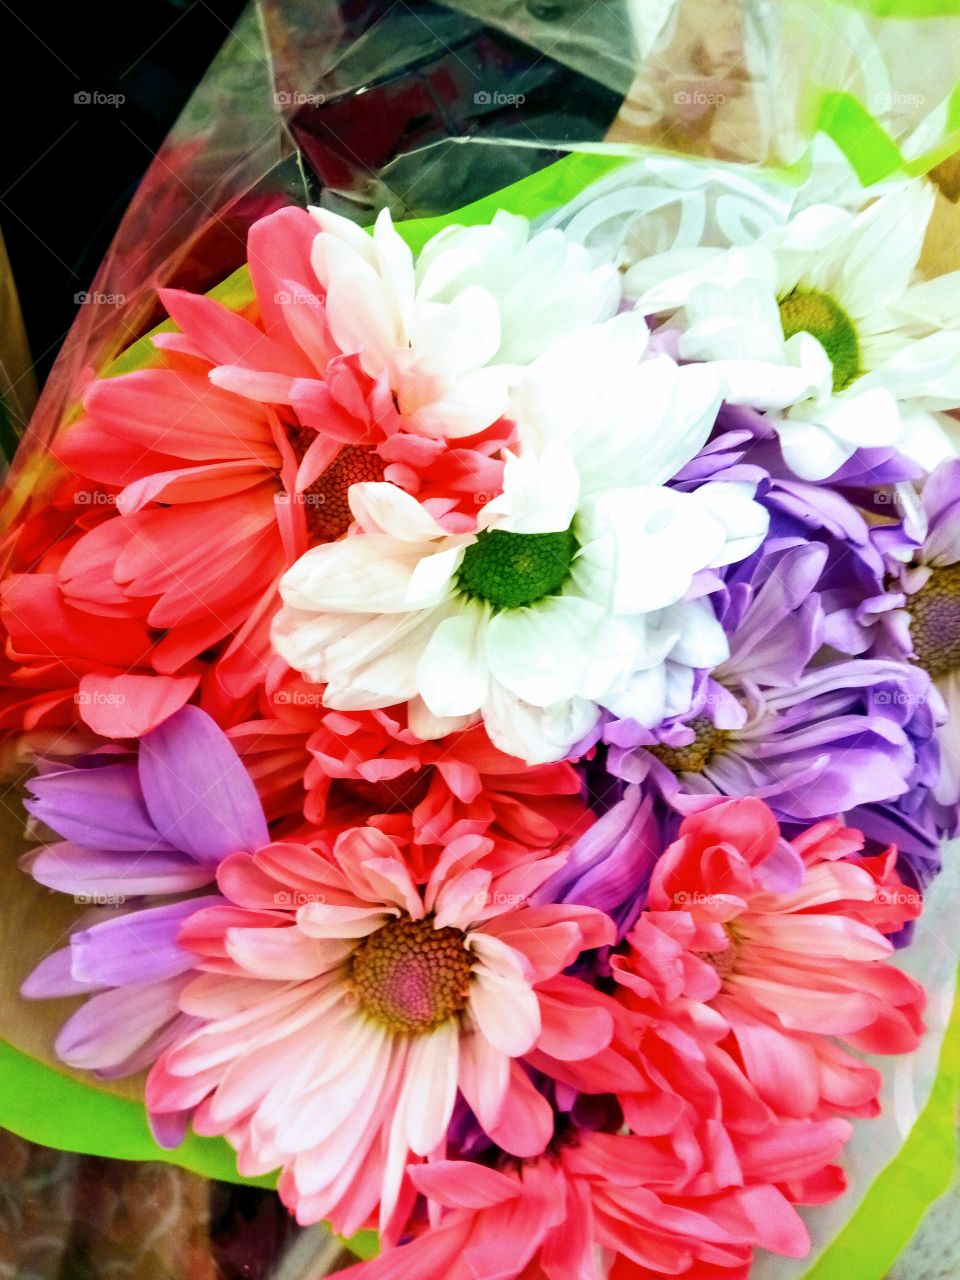 Spring through your day with this bouquet!